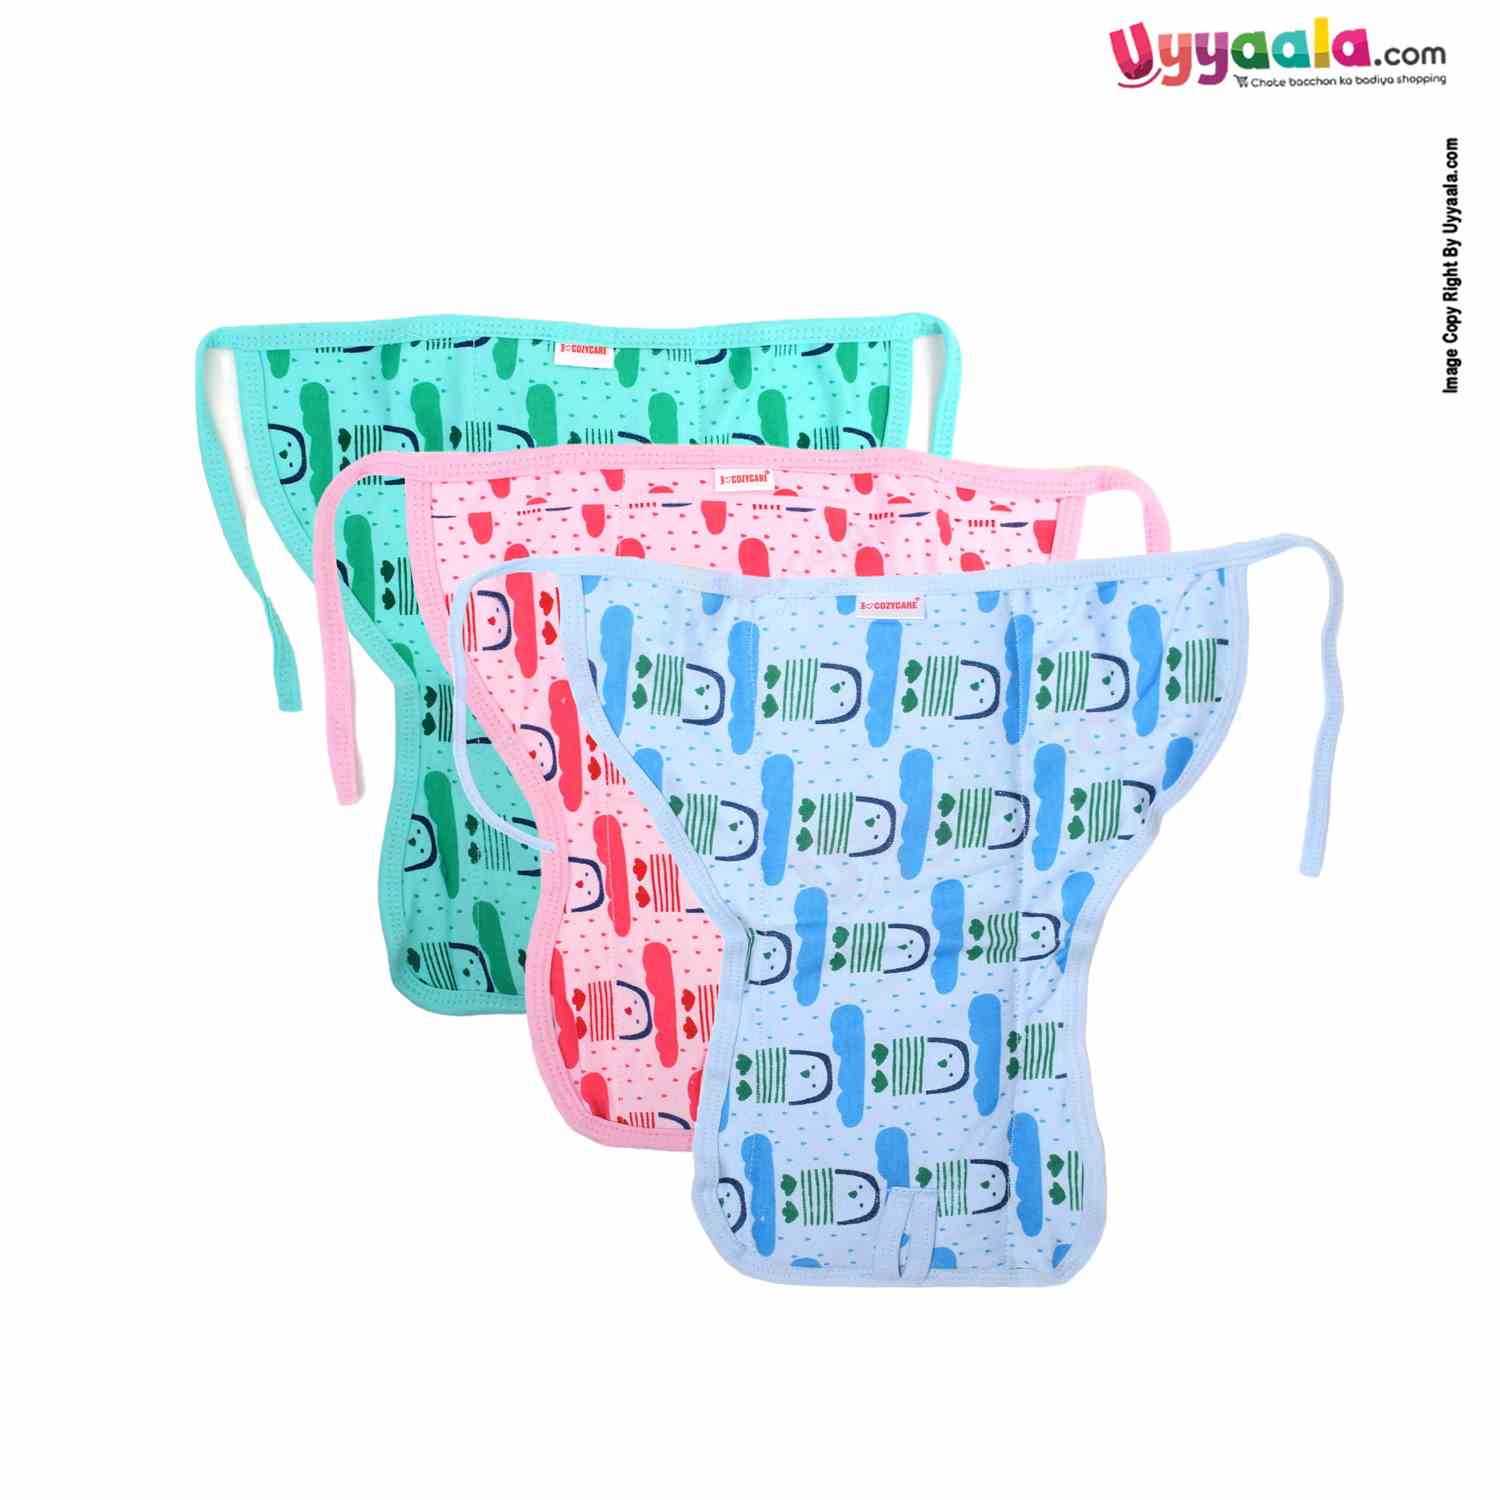 COZYCARE Washable Diapers Hosiery Tying Model Penguin Print Green, Pink & Blue 3P Set (S)